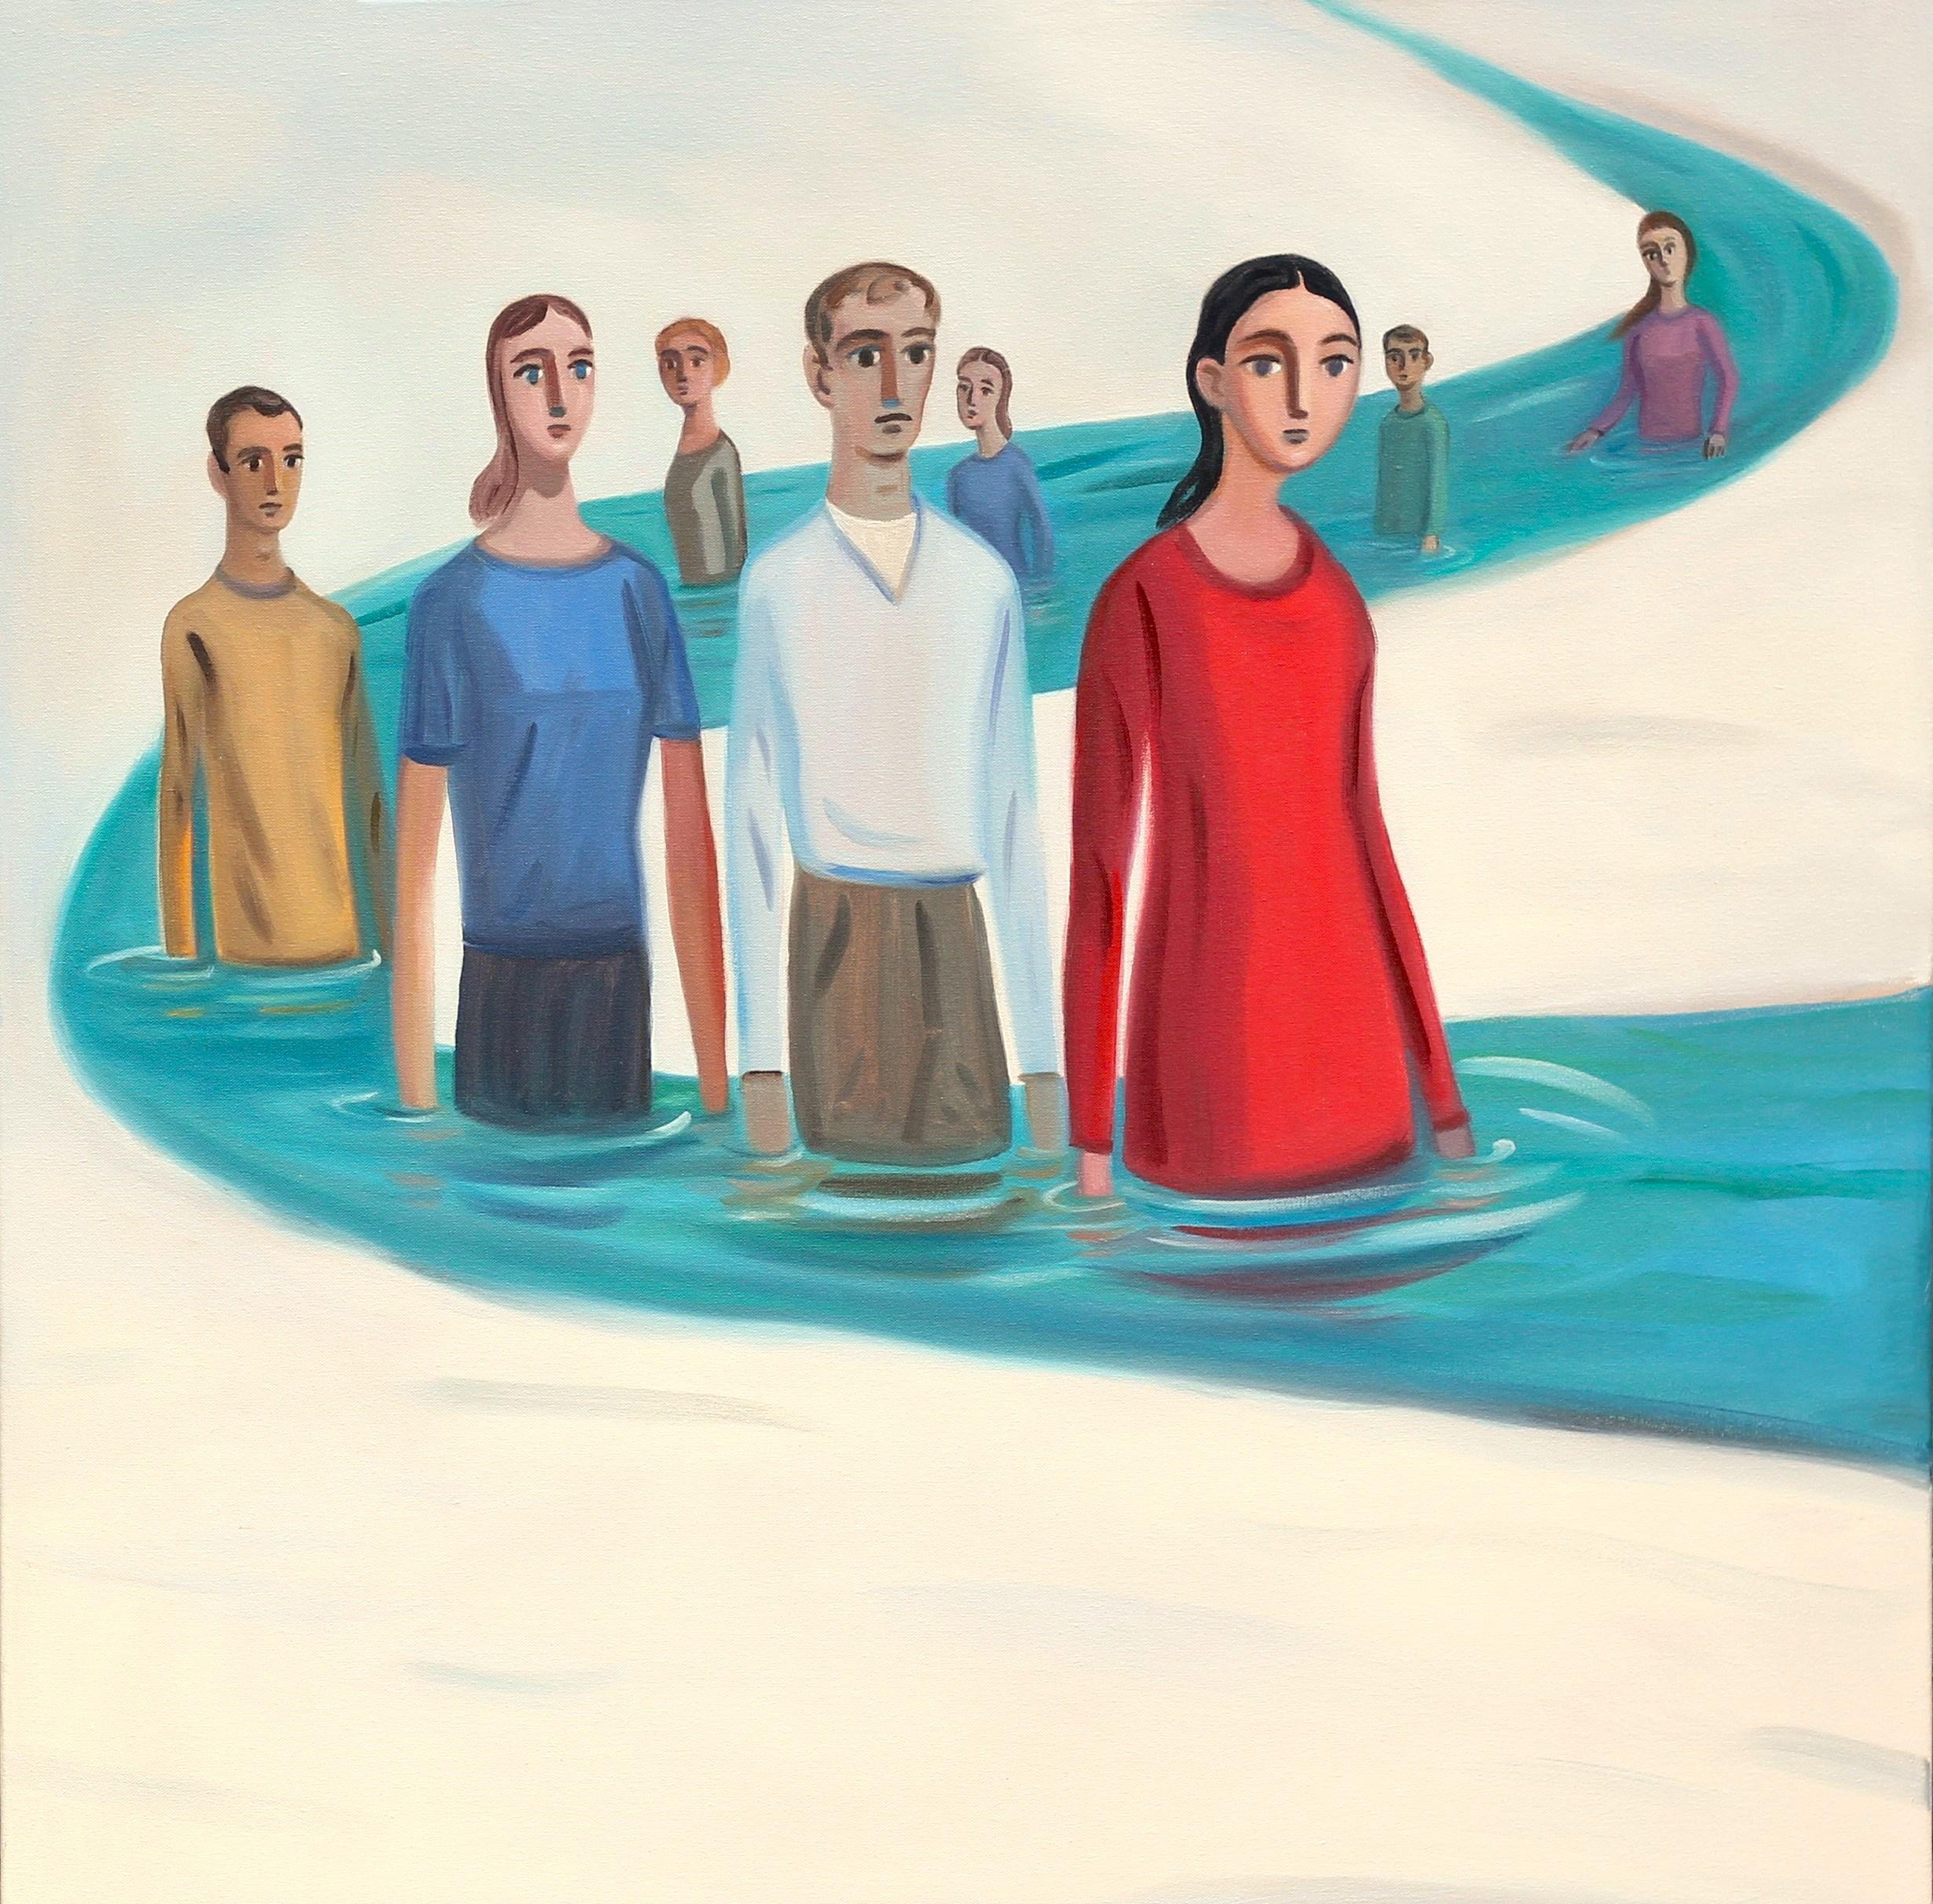 Sonia Martin Figurative Painting - EXILES  Oil on canvas, figurative, imaginary, figures in a river